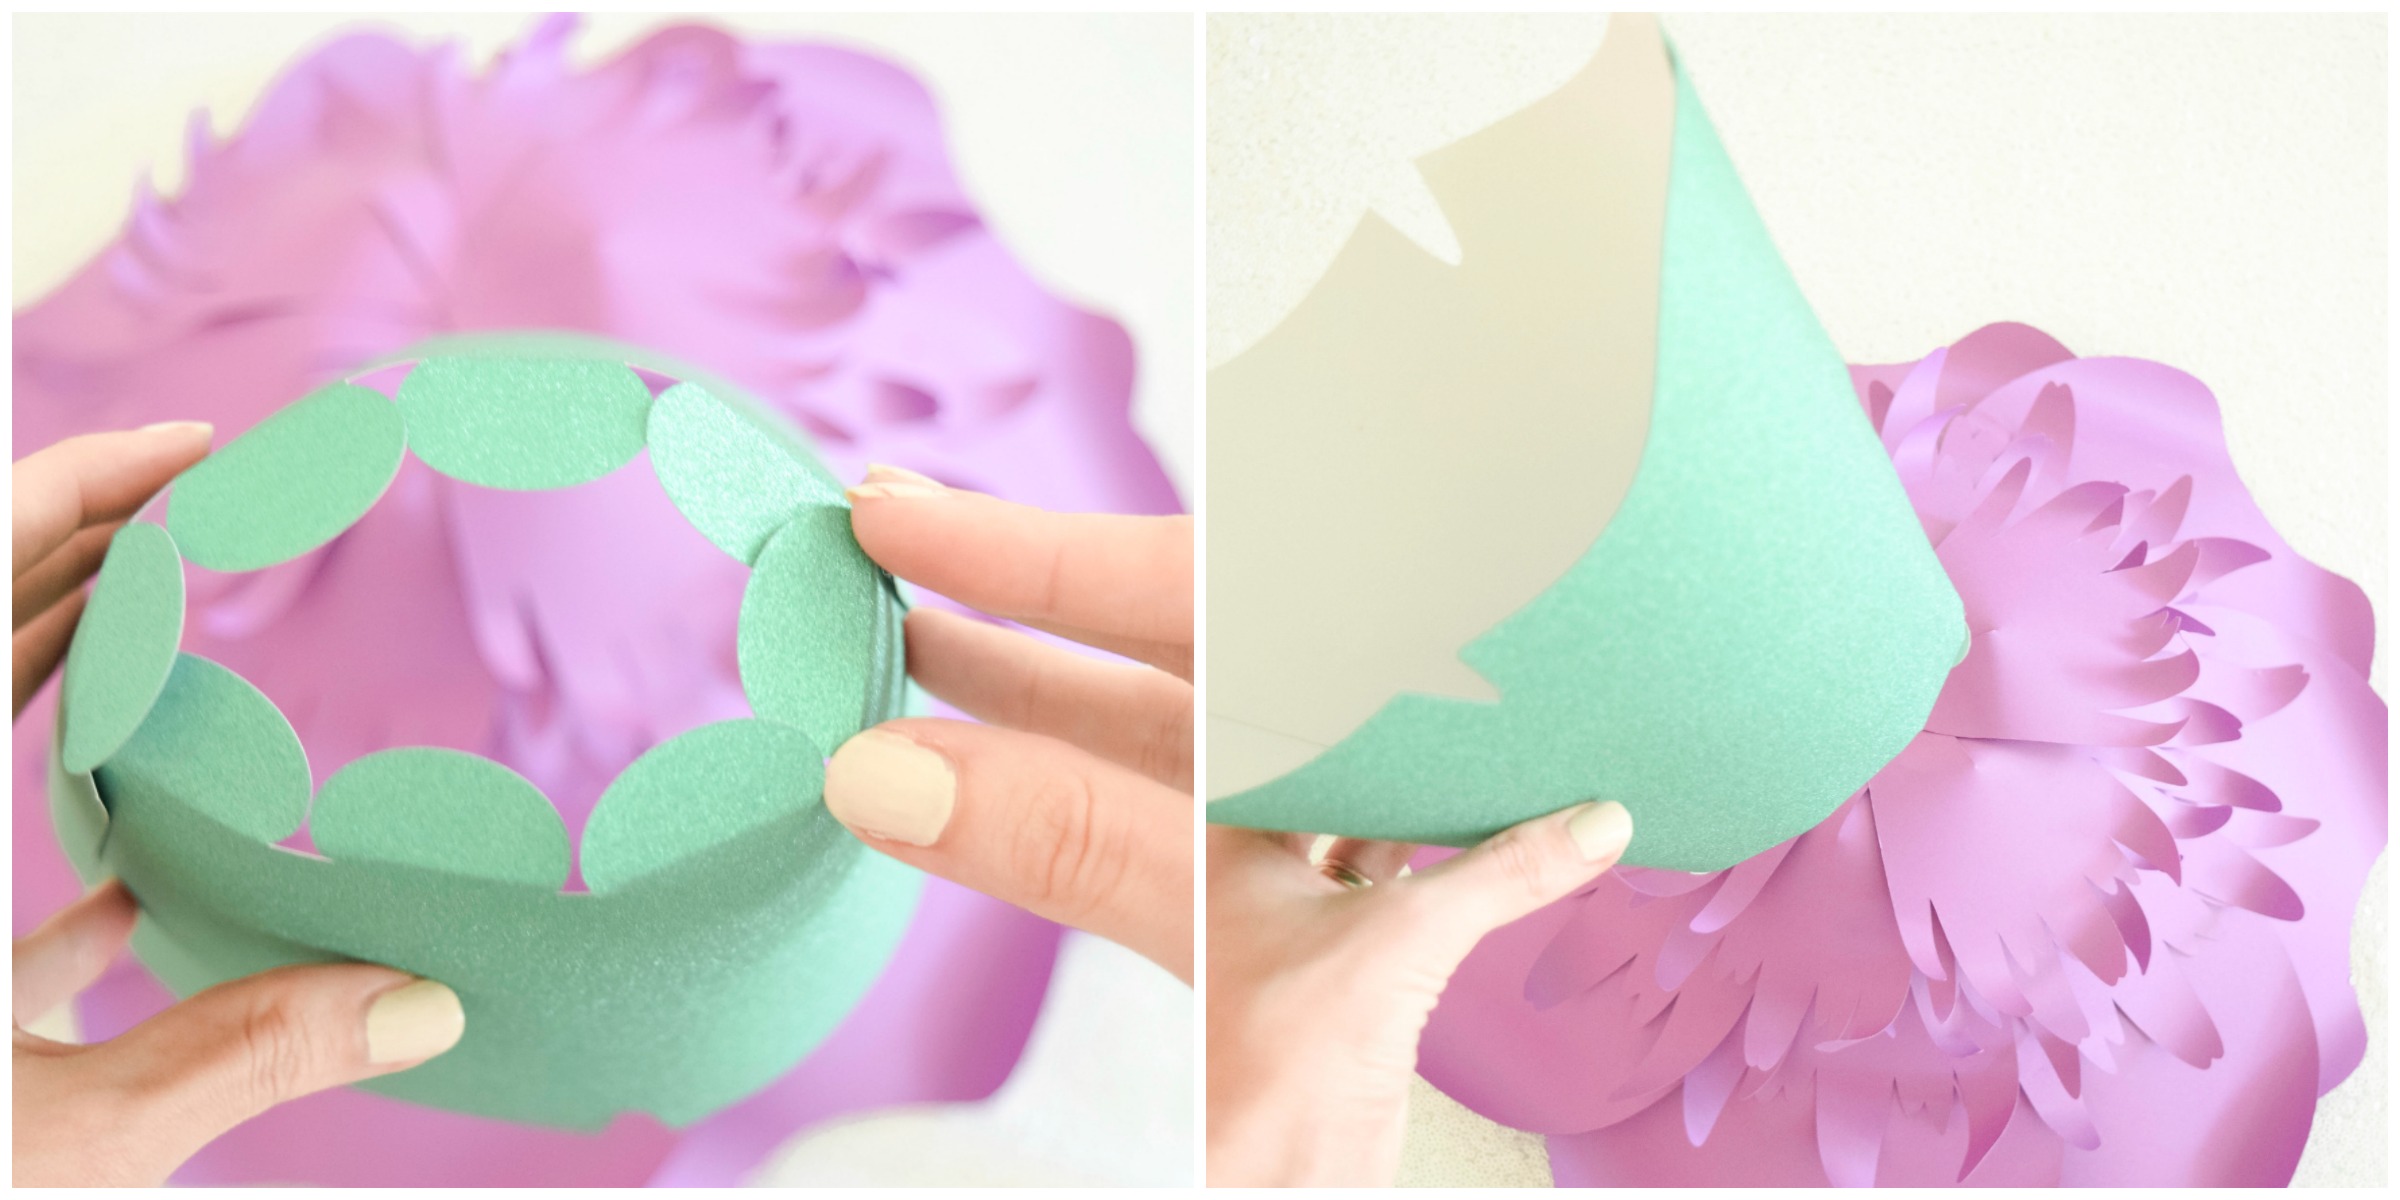 Twi side-by-side images show how to attach the green paper dress bodice to the purple paper skirt.